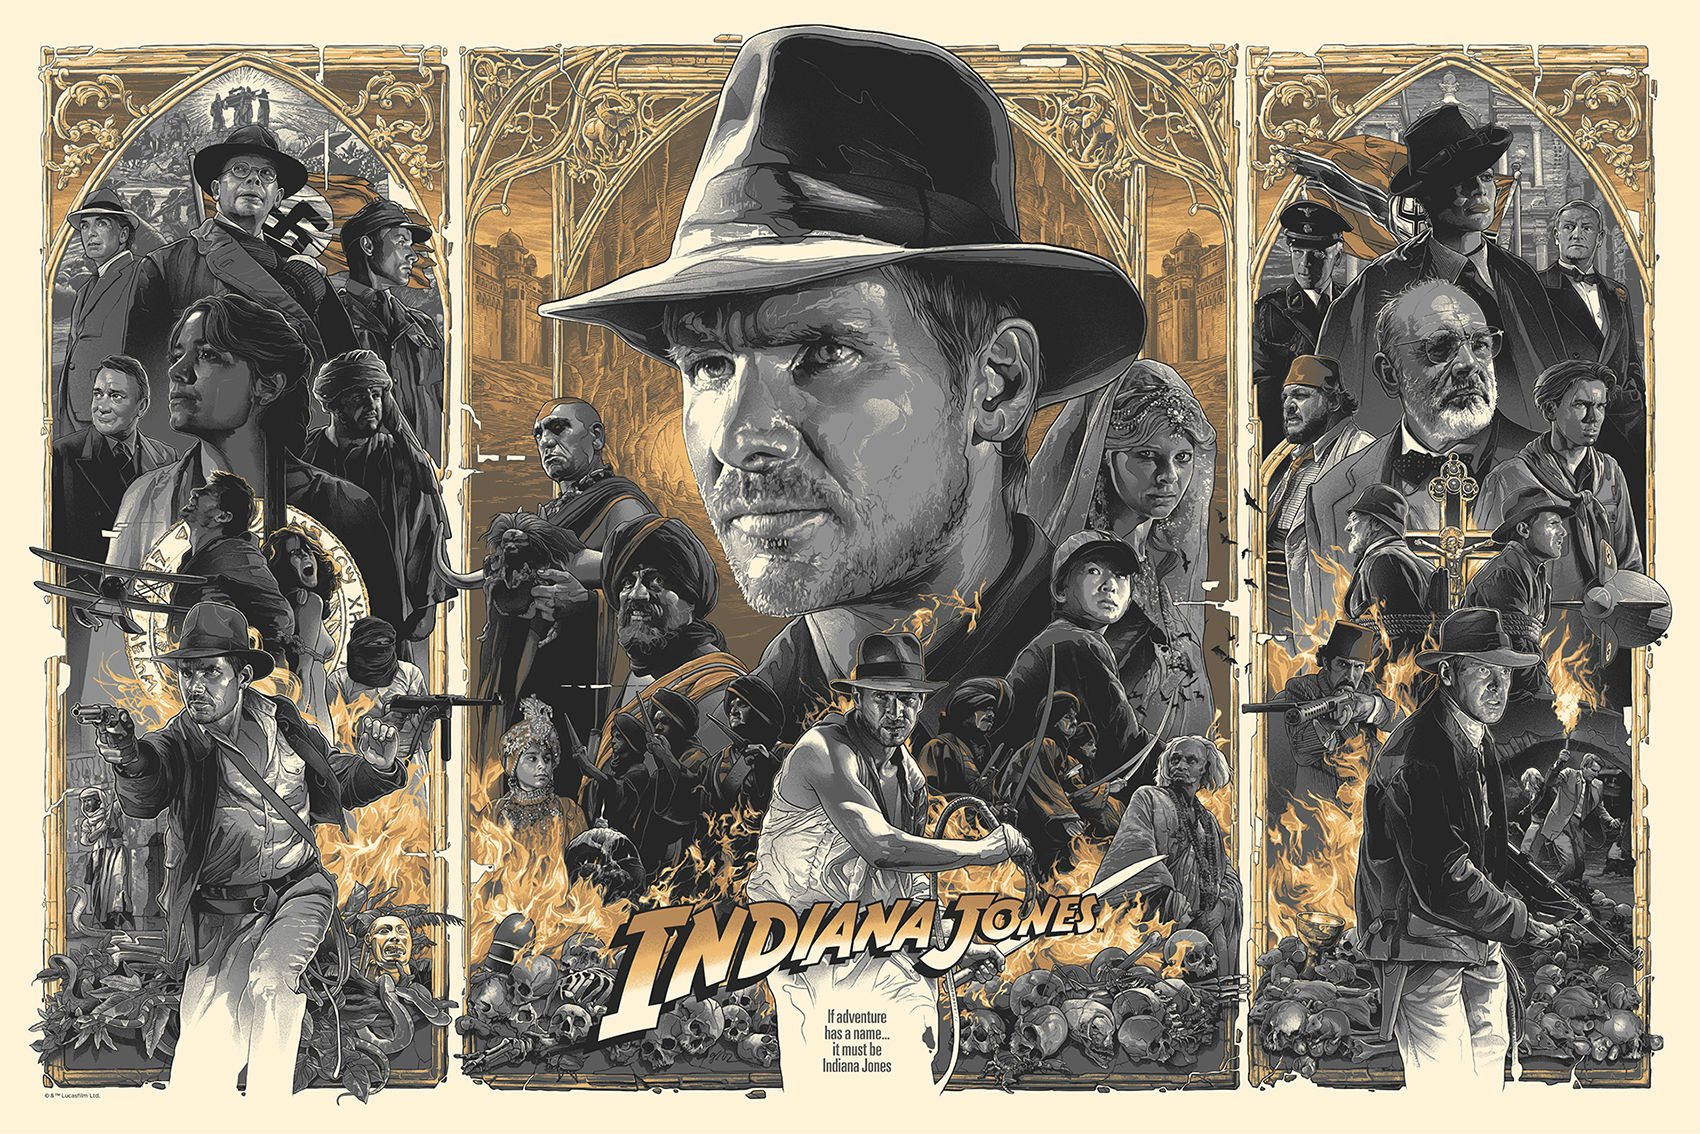 The Indiana Jones Trilogy Looks Incredible In This Triptych Poster